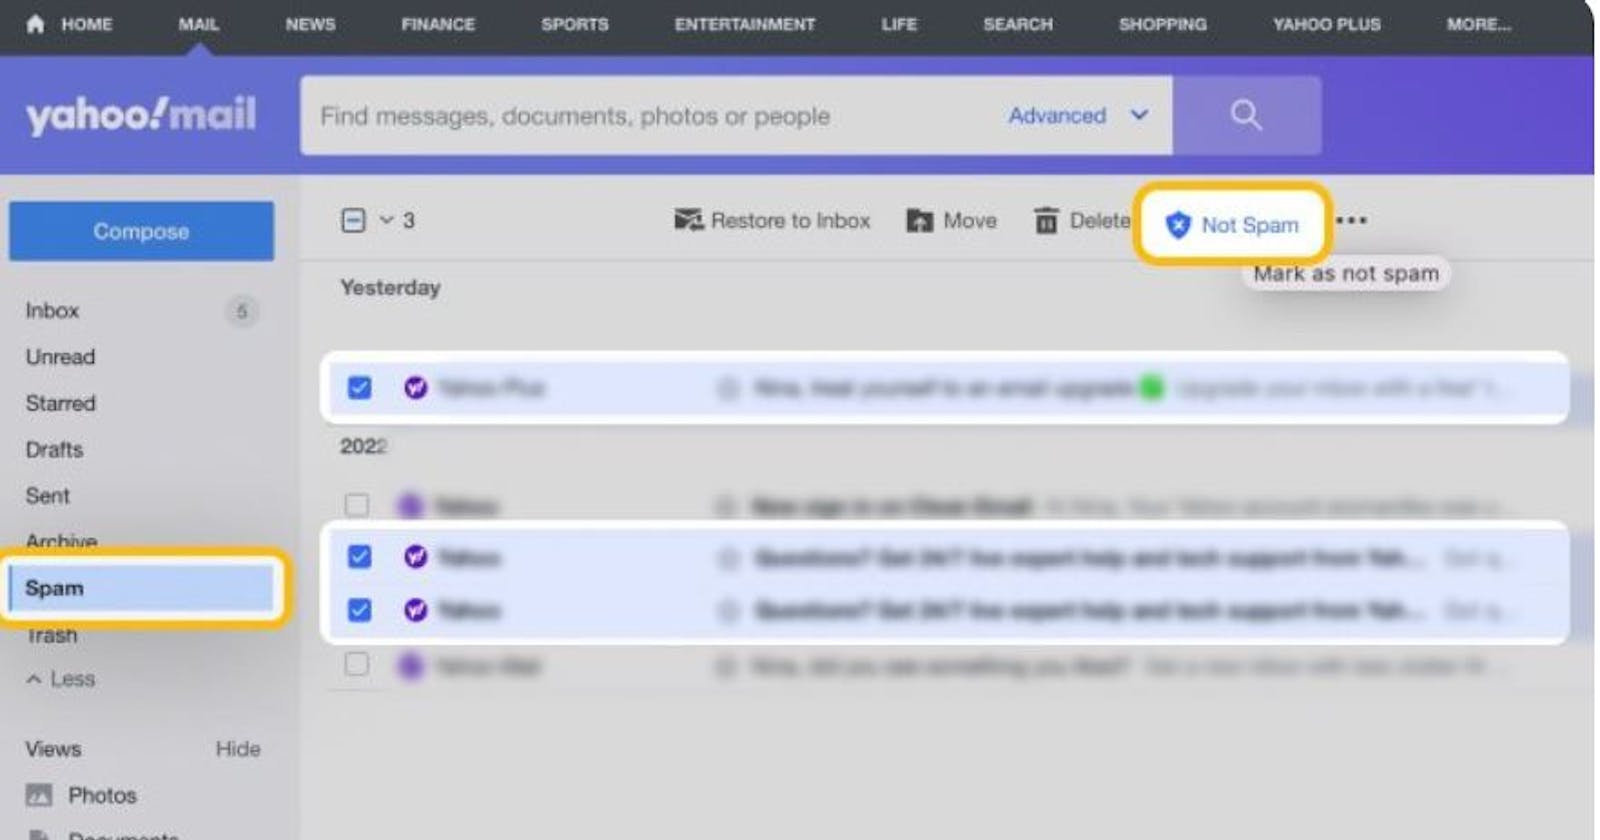 How to Fix Yahoo to Prevent Emails From Entering the Spam Folder